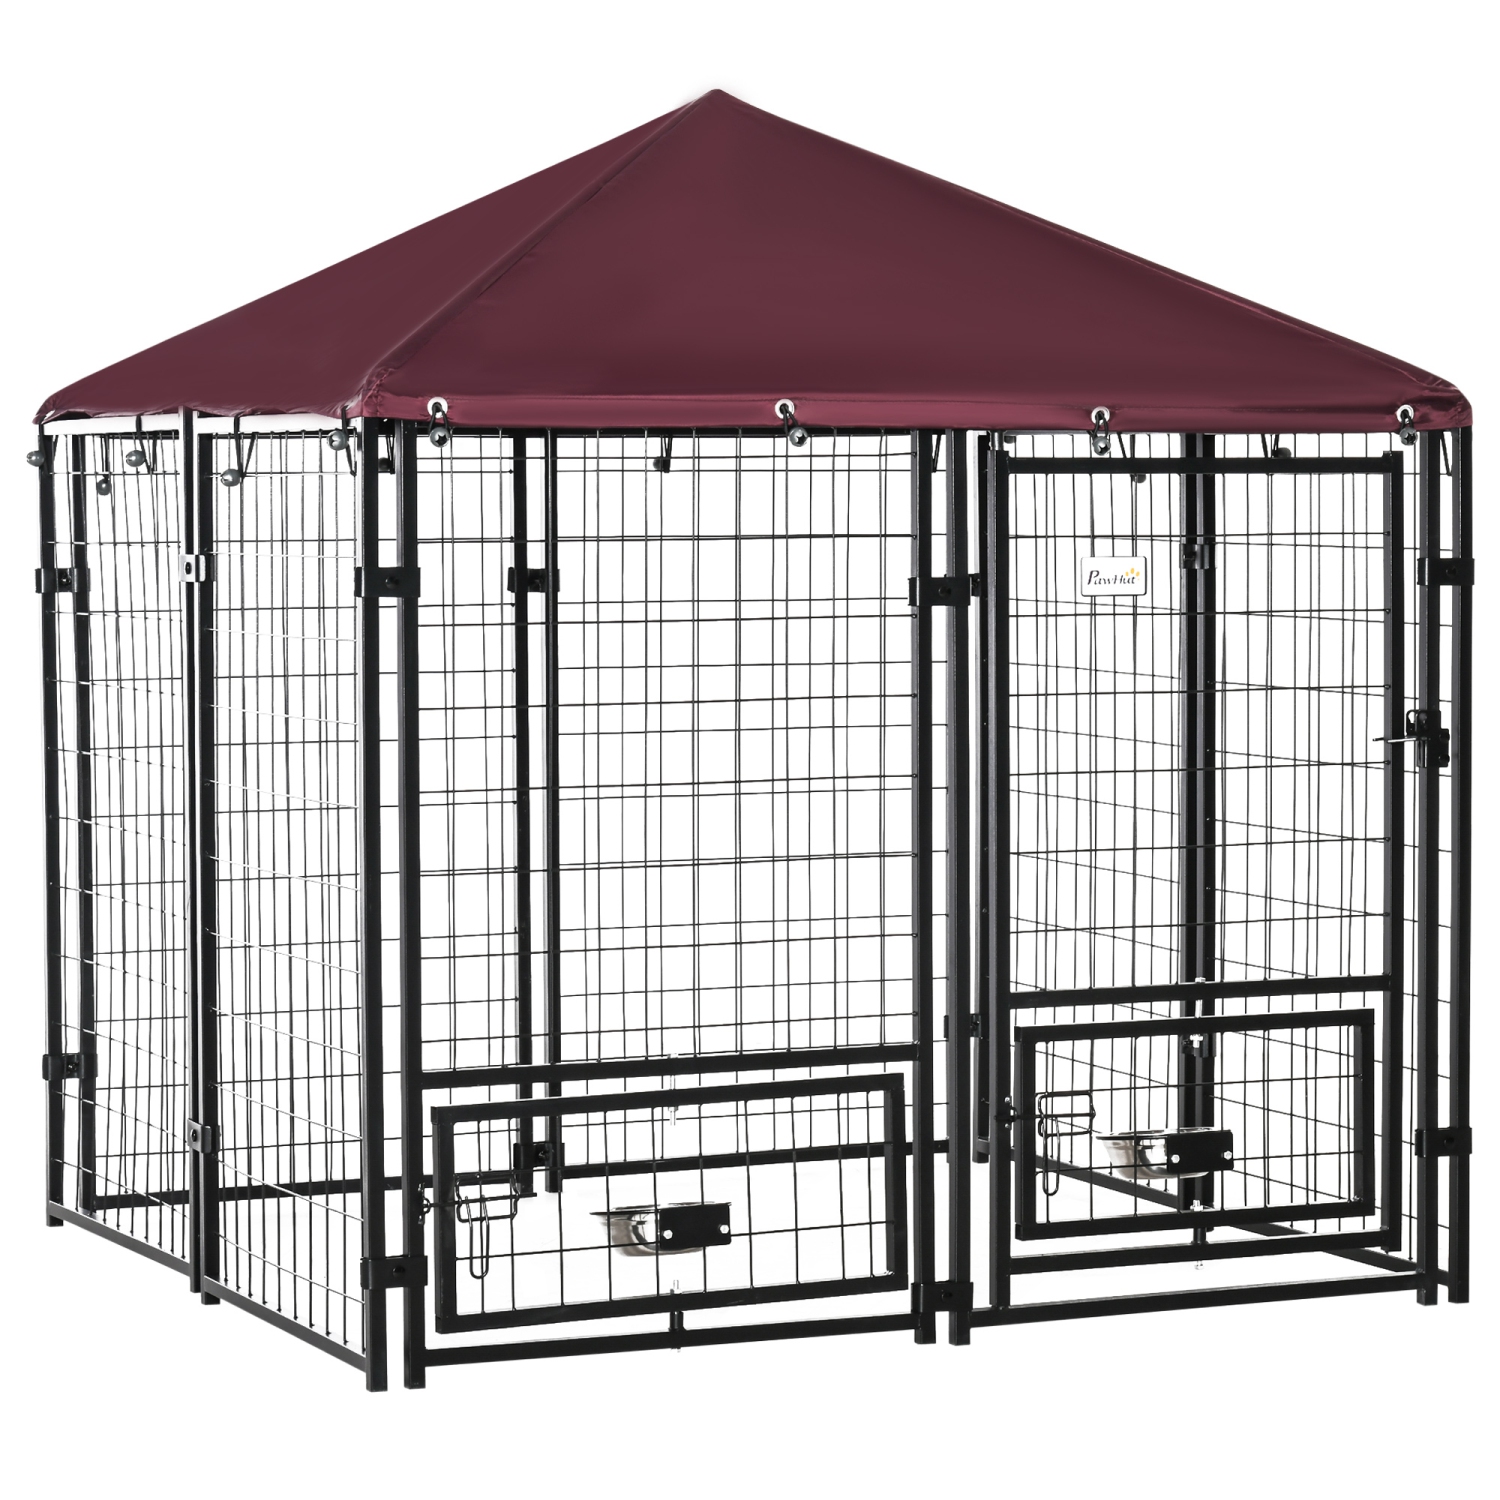 PawHut Outdoor Dog Kennel, Welded Wire Steel Fence, Lockable Pet Playpen Crate, with Water-, UV-Resistant Canopy Top, Door, Rotating Bowl Holders, 4.6ft x 4.6ft x 5ft